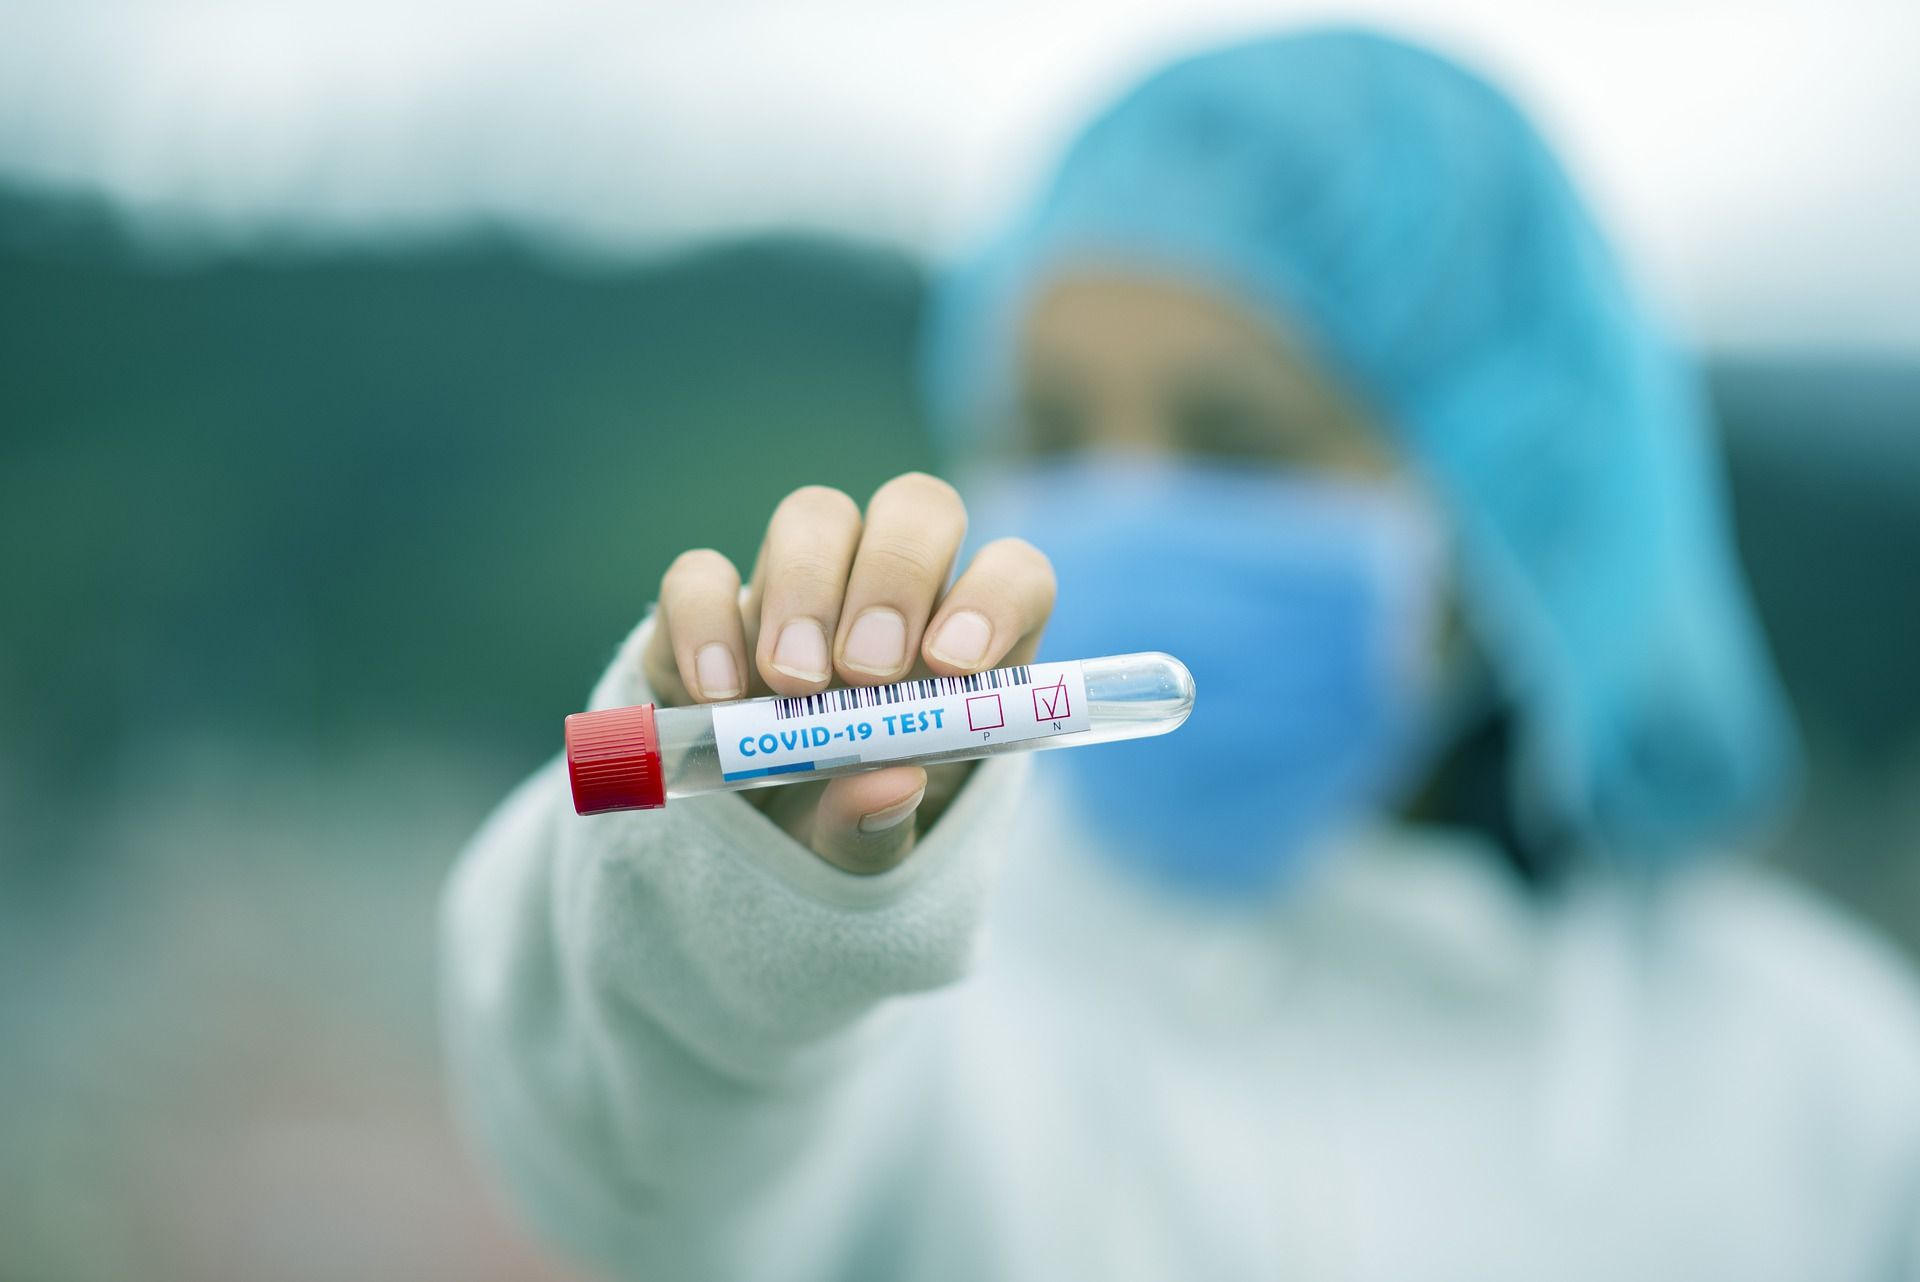 A medical professional/doctor/nurse holds a COVID-19 test tube.